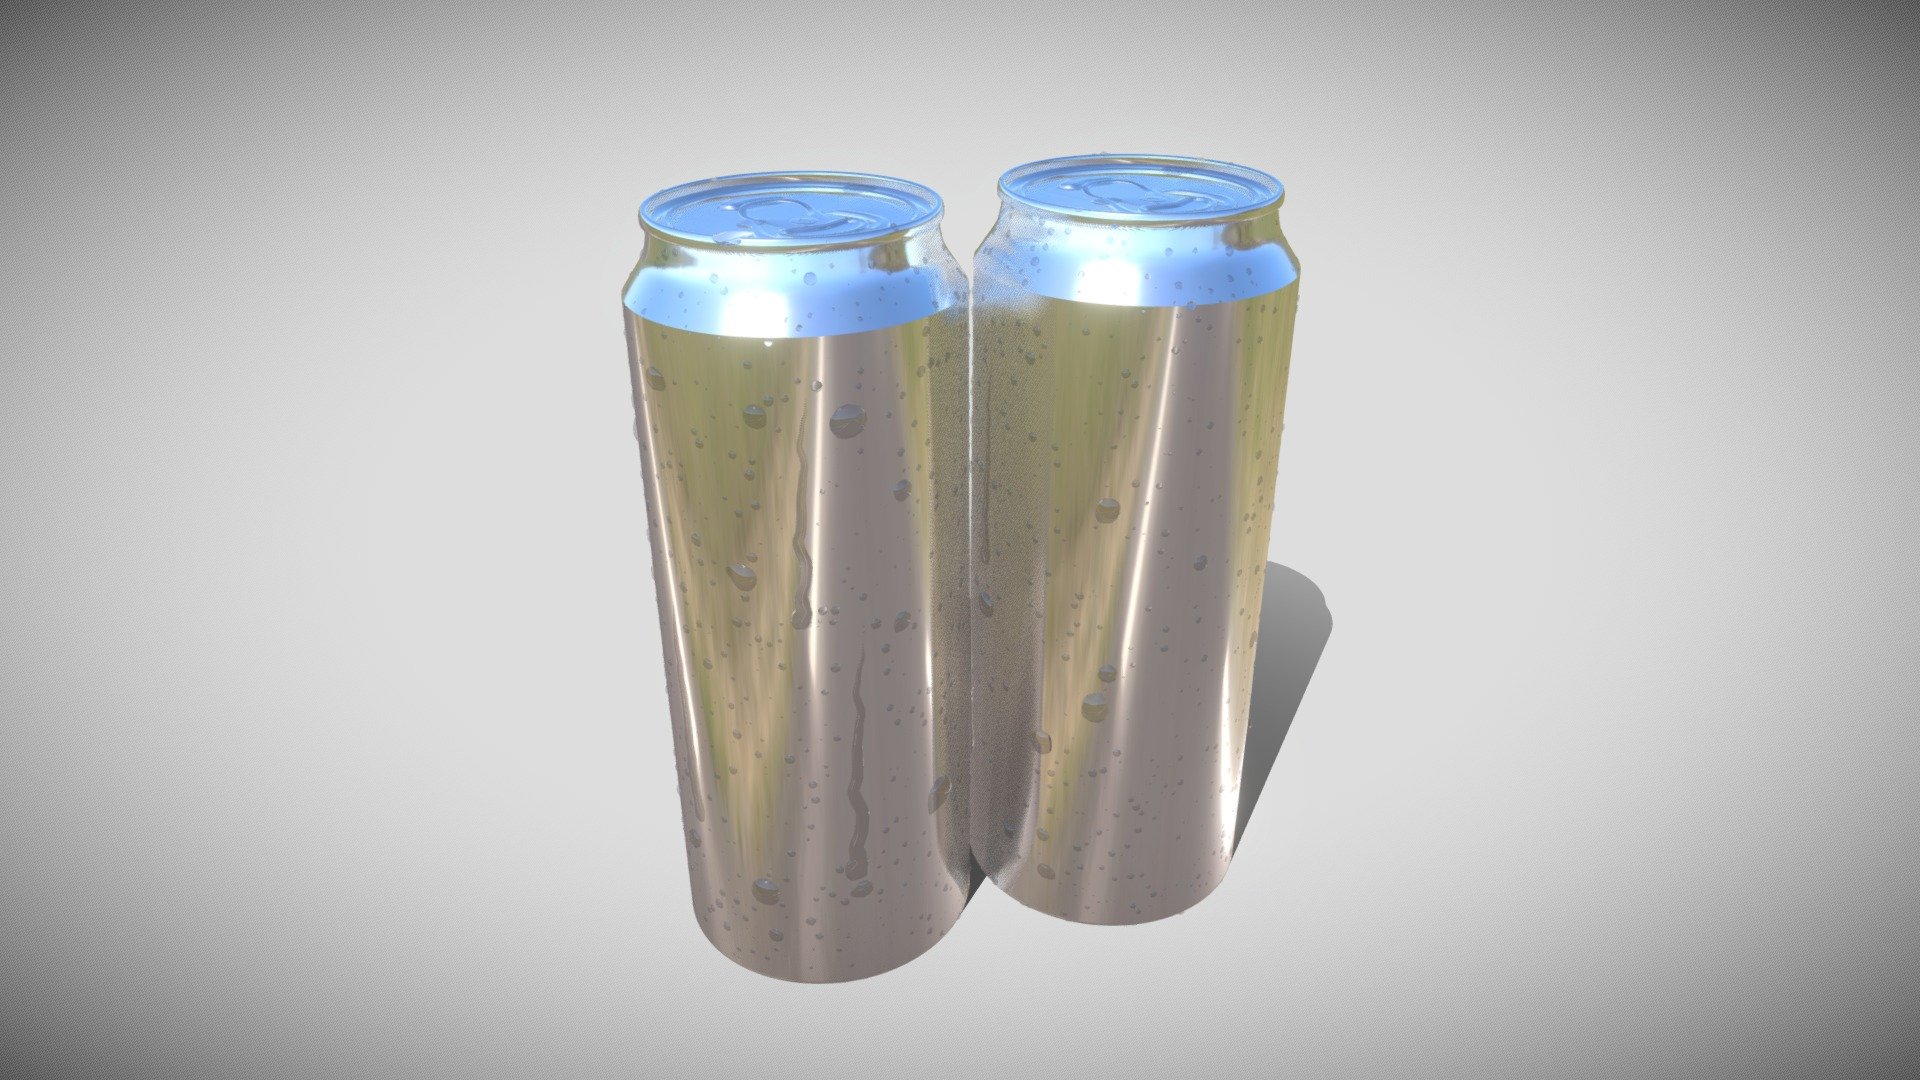 BUYNOW : 8$ : https://bit.ly/tin-droplets-sketchfab
E-Mail : hookstar1993@gmail.com

The 3D model of tin with droplets made in Maya &amp; Blender is a highly detailed and realistic representation of a tin container with water droplets on its surface. The model is created using Maya's powerful modeling tools and incorporates advanced texturing and lighting techniques to create a highly realistic and visually appealing final product.

The tin container is modeled with great attention to detail, with every curve, indentation, and texture meticulously recreated to give it a highly realistic look and feel. The water droplets on the surface of the tin are also modeled with precision, with every droplet unique and reflective of the natural properties of water.

The lighting in the scene is designed to highlight the details of the model and create a highly realistic appearance 3d model